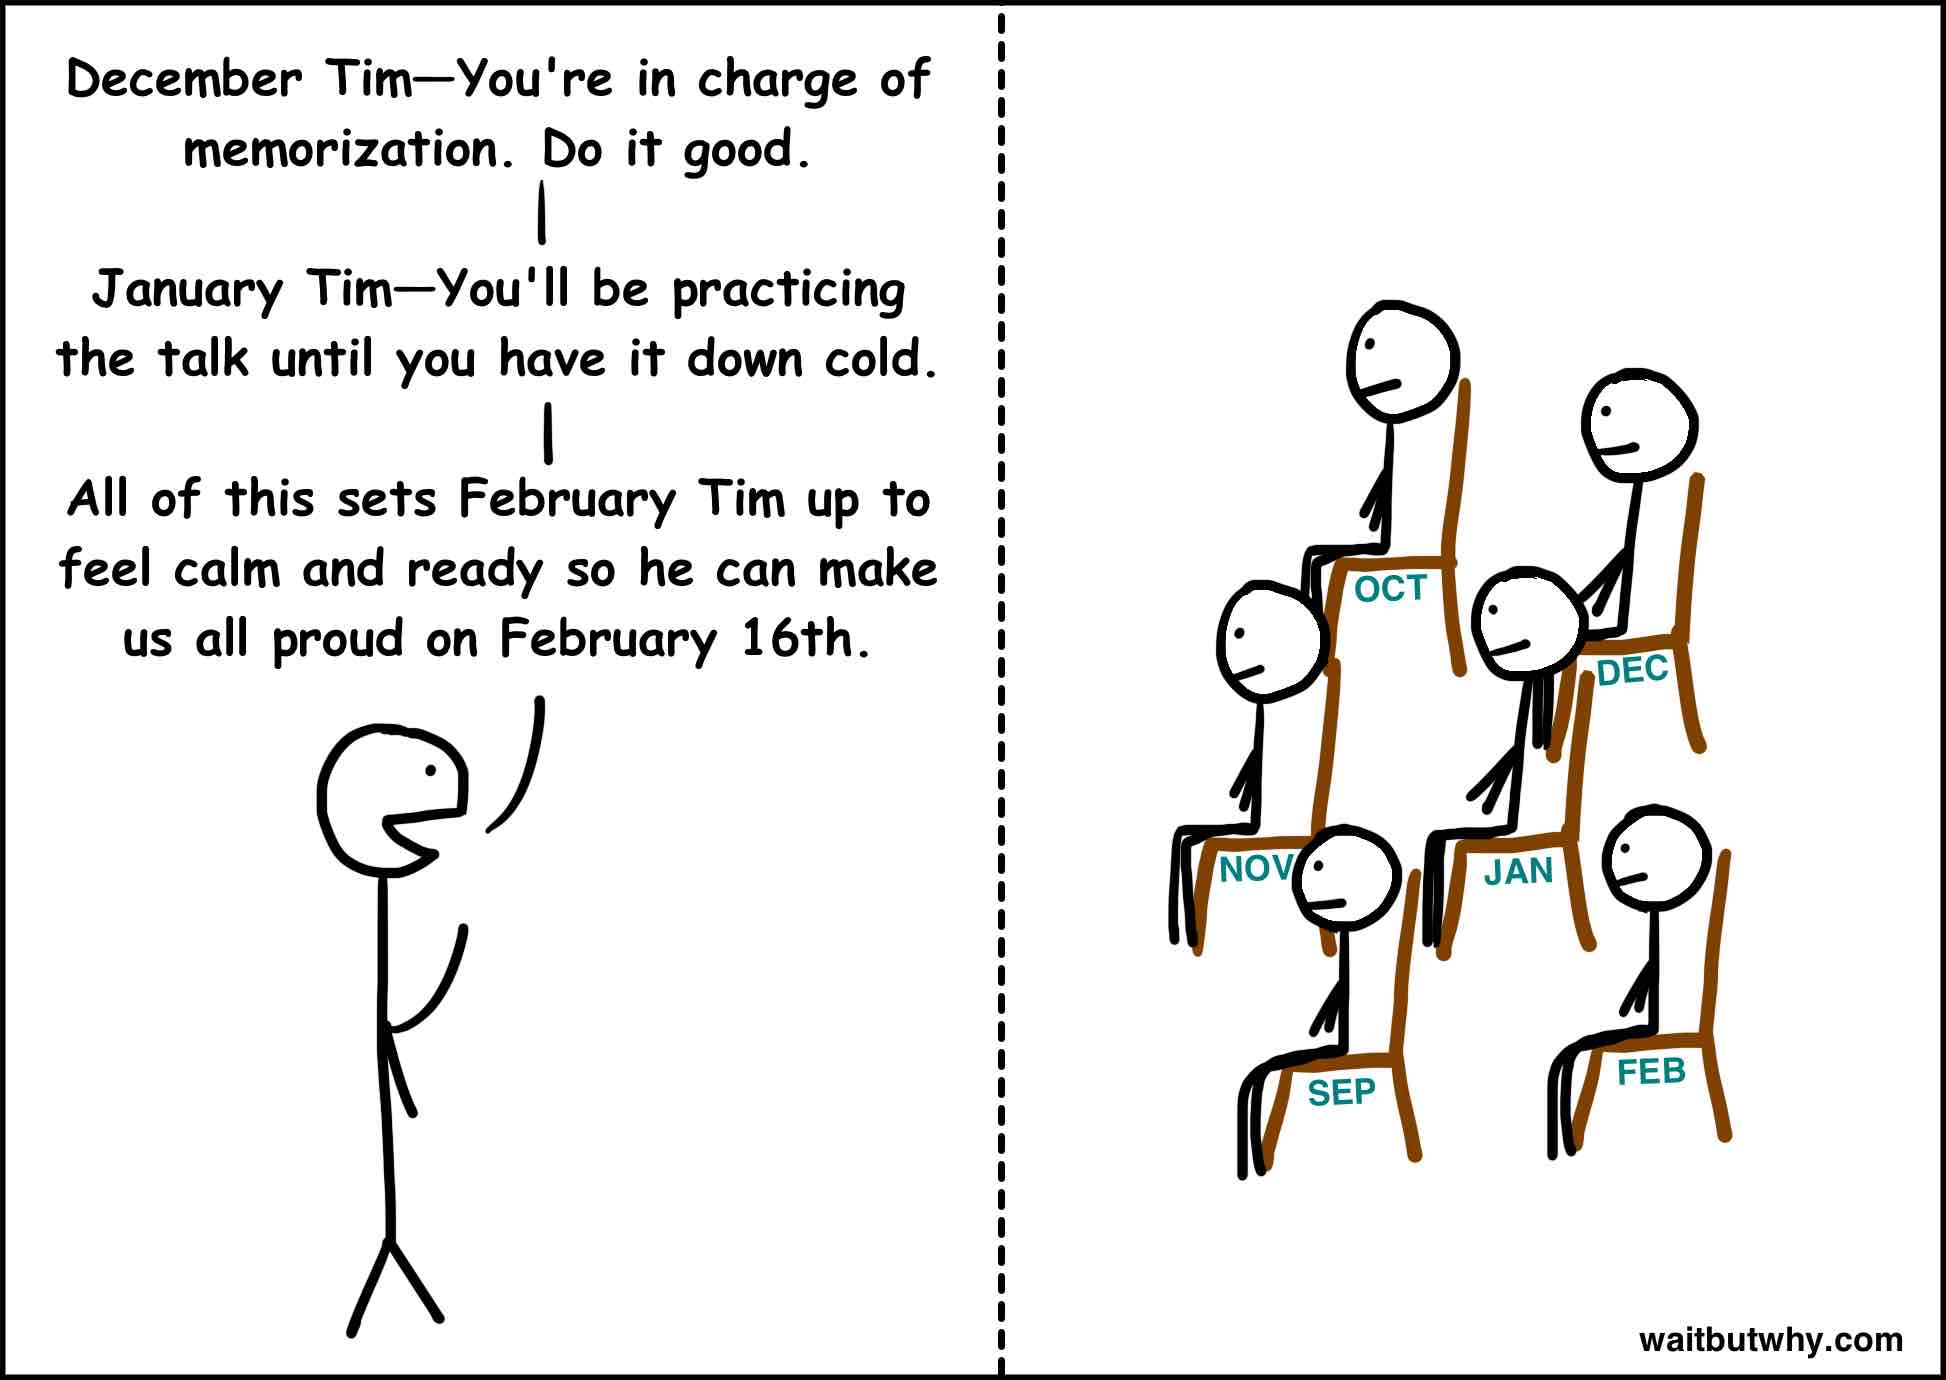 December Tim, you're in charge of memorization. Do good. January Tim, you'll be practicing the talk until you have it down cold. All of this sets up February Tim to feel calm and ready on February 16th.